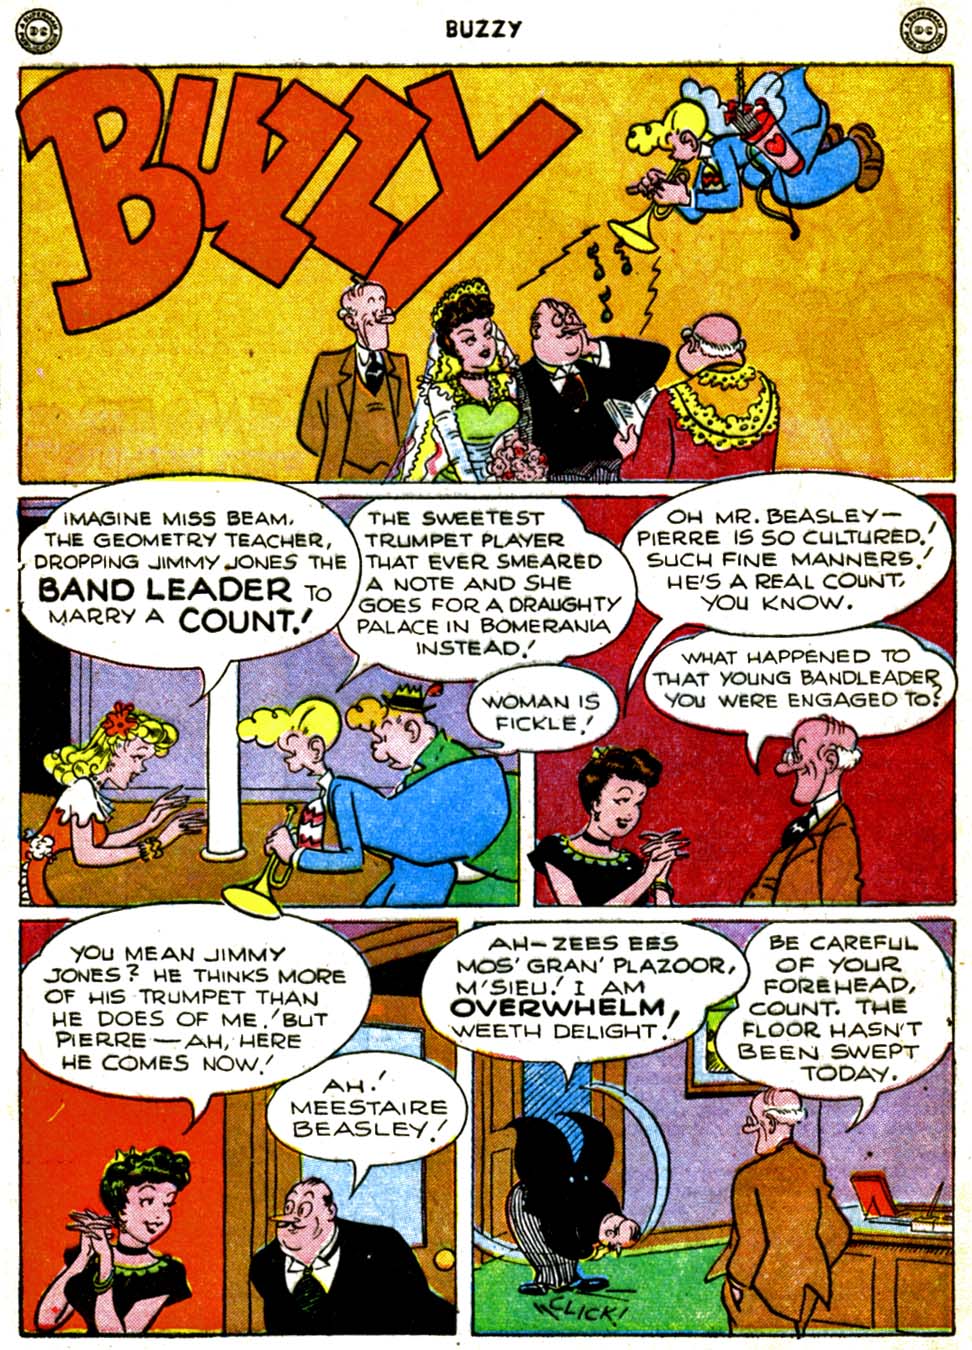 Read online Buzzy comic -  Issue #7 - 42